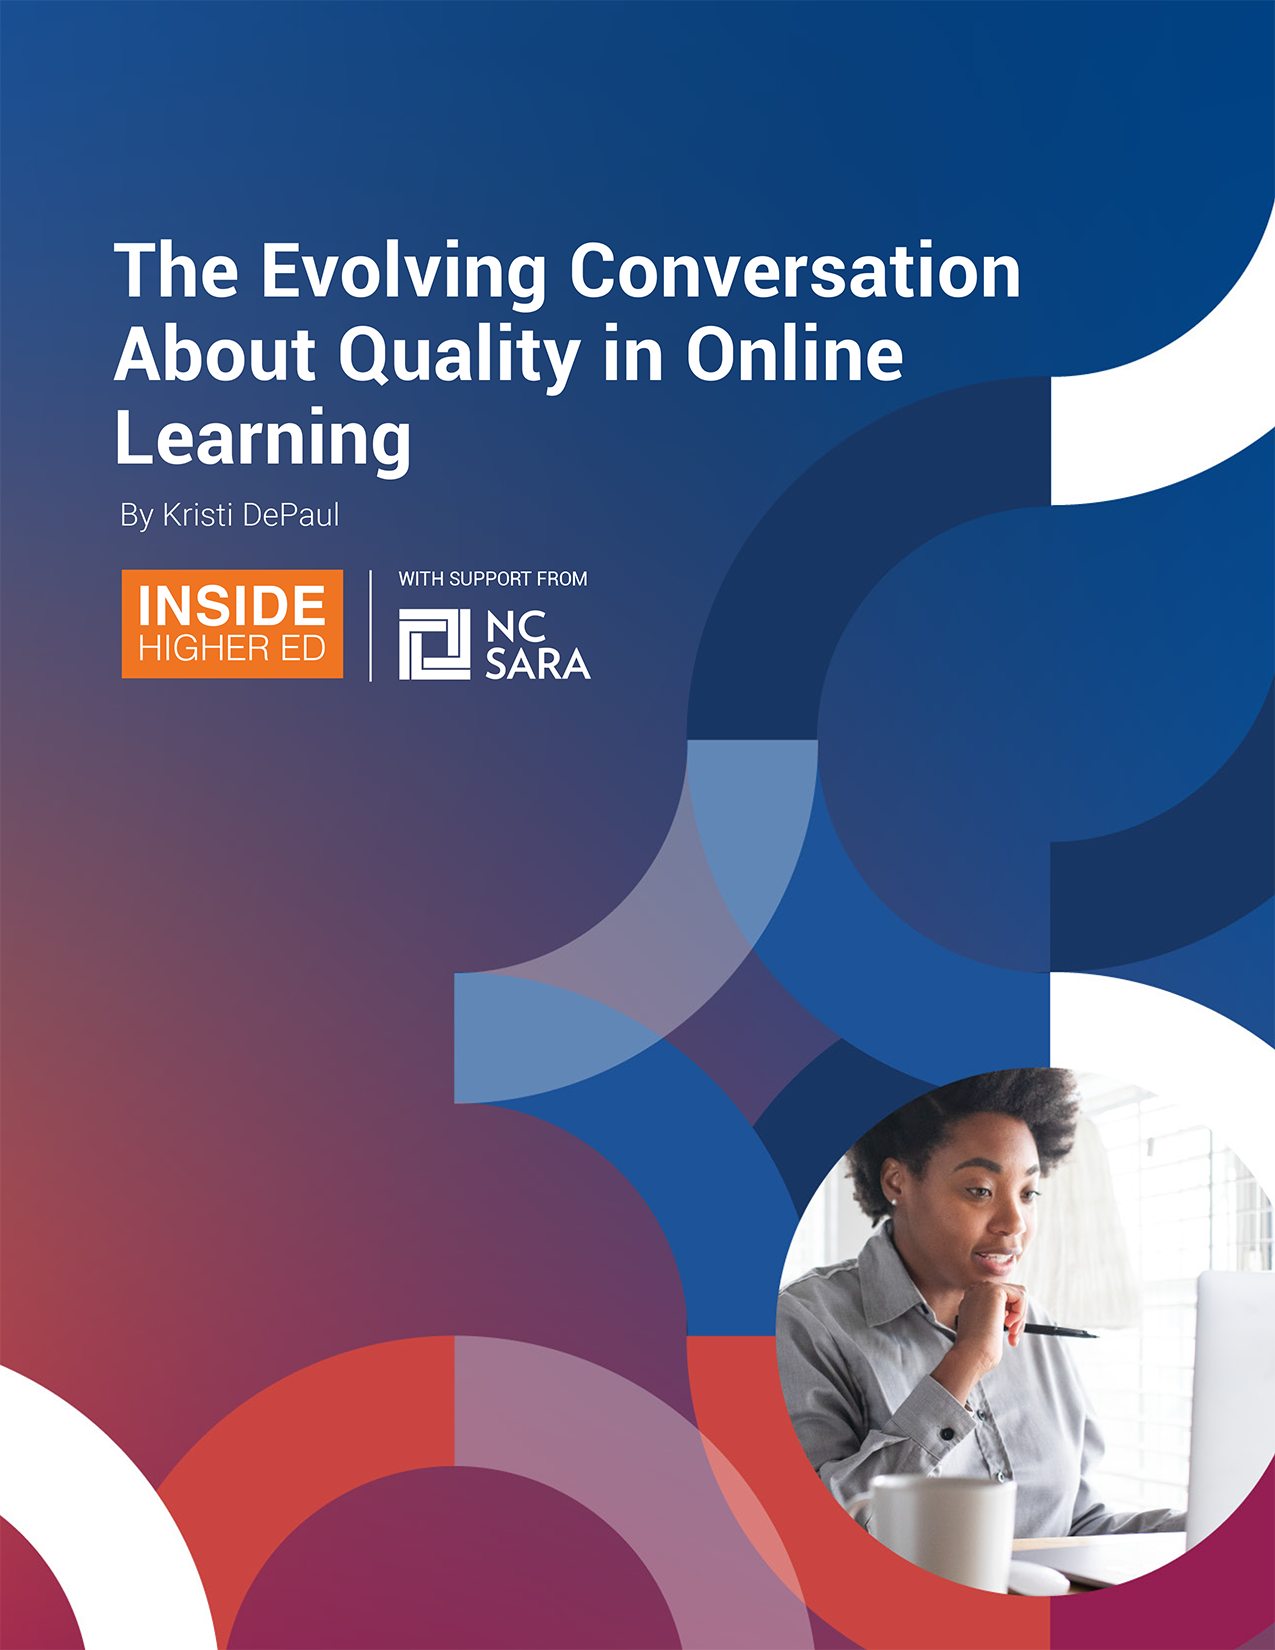 The Evolving Conversation About Quality in Online Learning